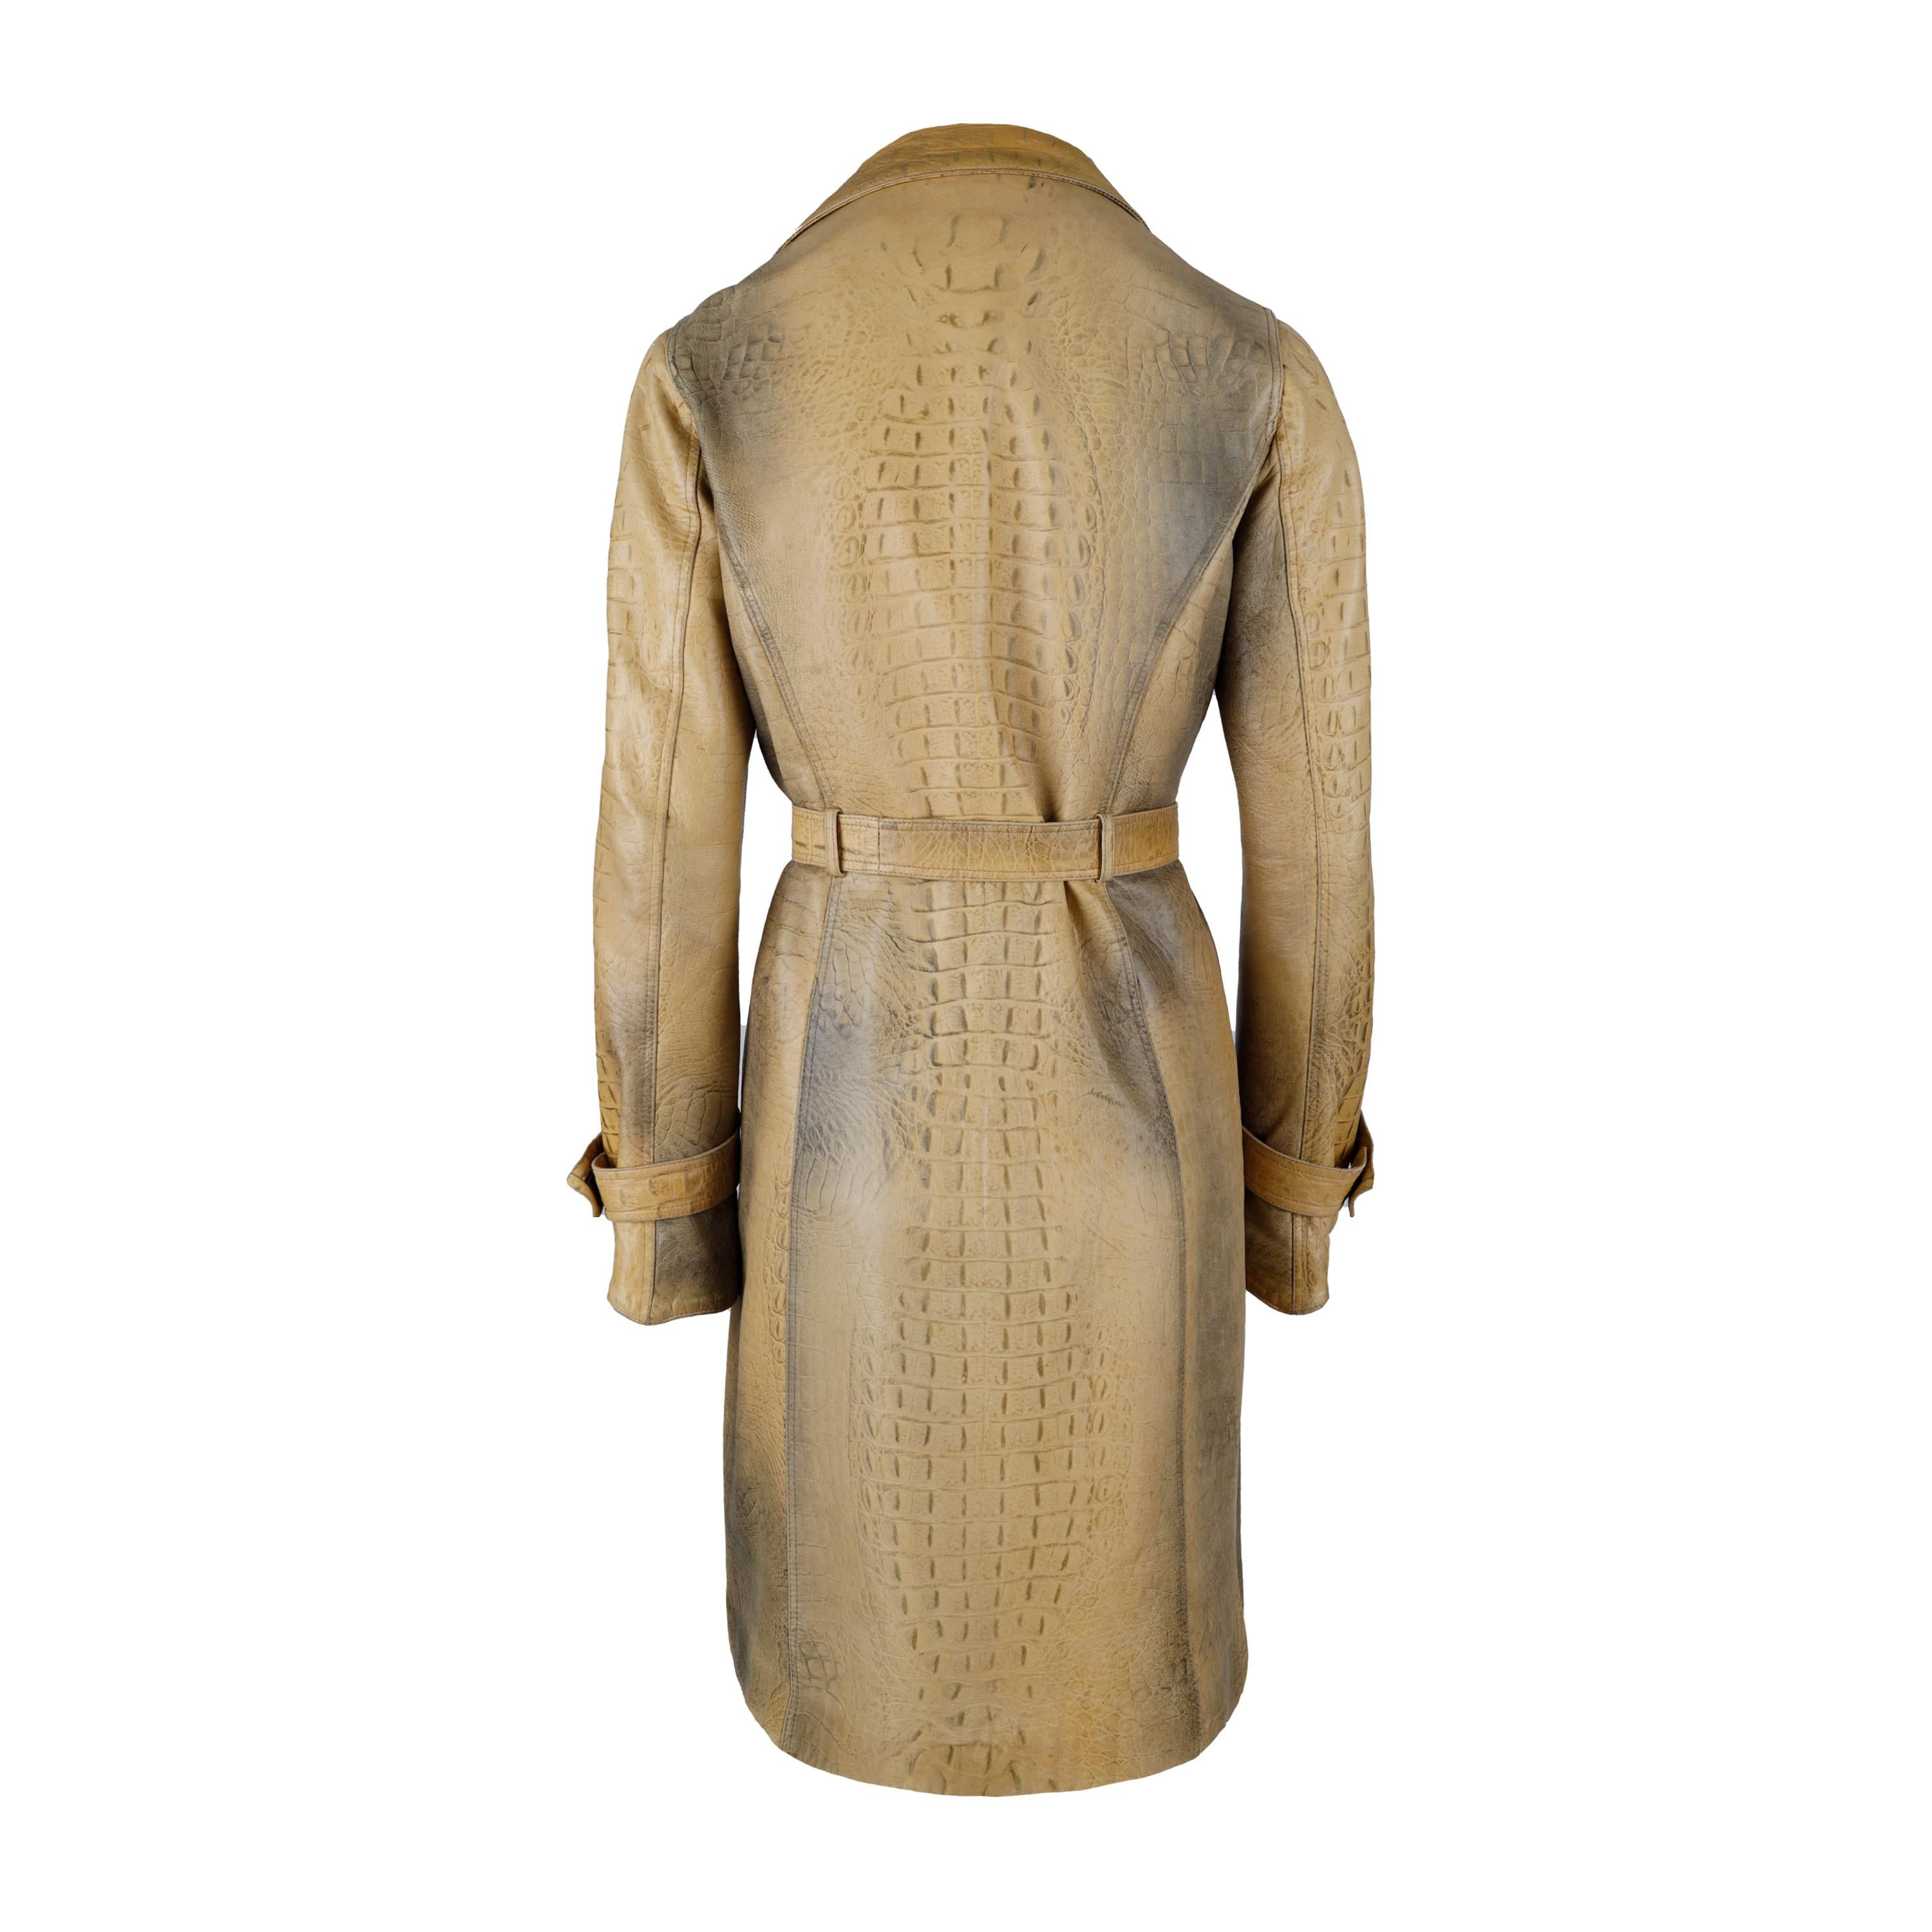 This Roberto Cavalli leather trench coat from Fall Winter 2000 collection is beautifully crafted from croc-embossed yellow-toned tan leather and finished with an ombre effect. It features a notched lapel collar, a belted construction, velcro cuff